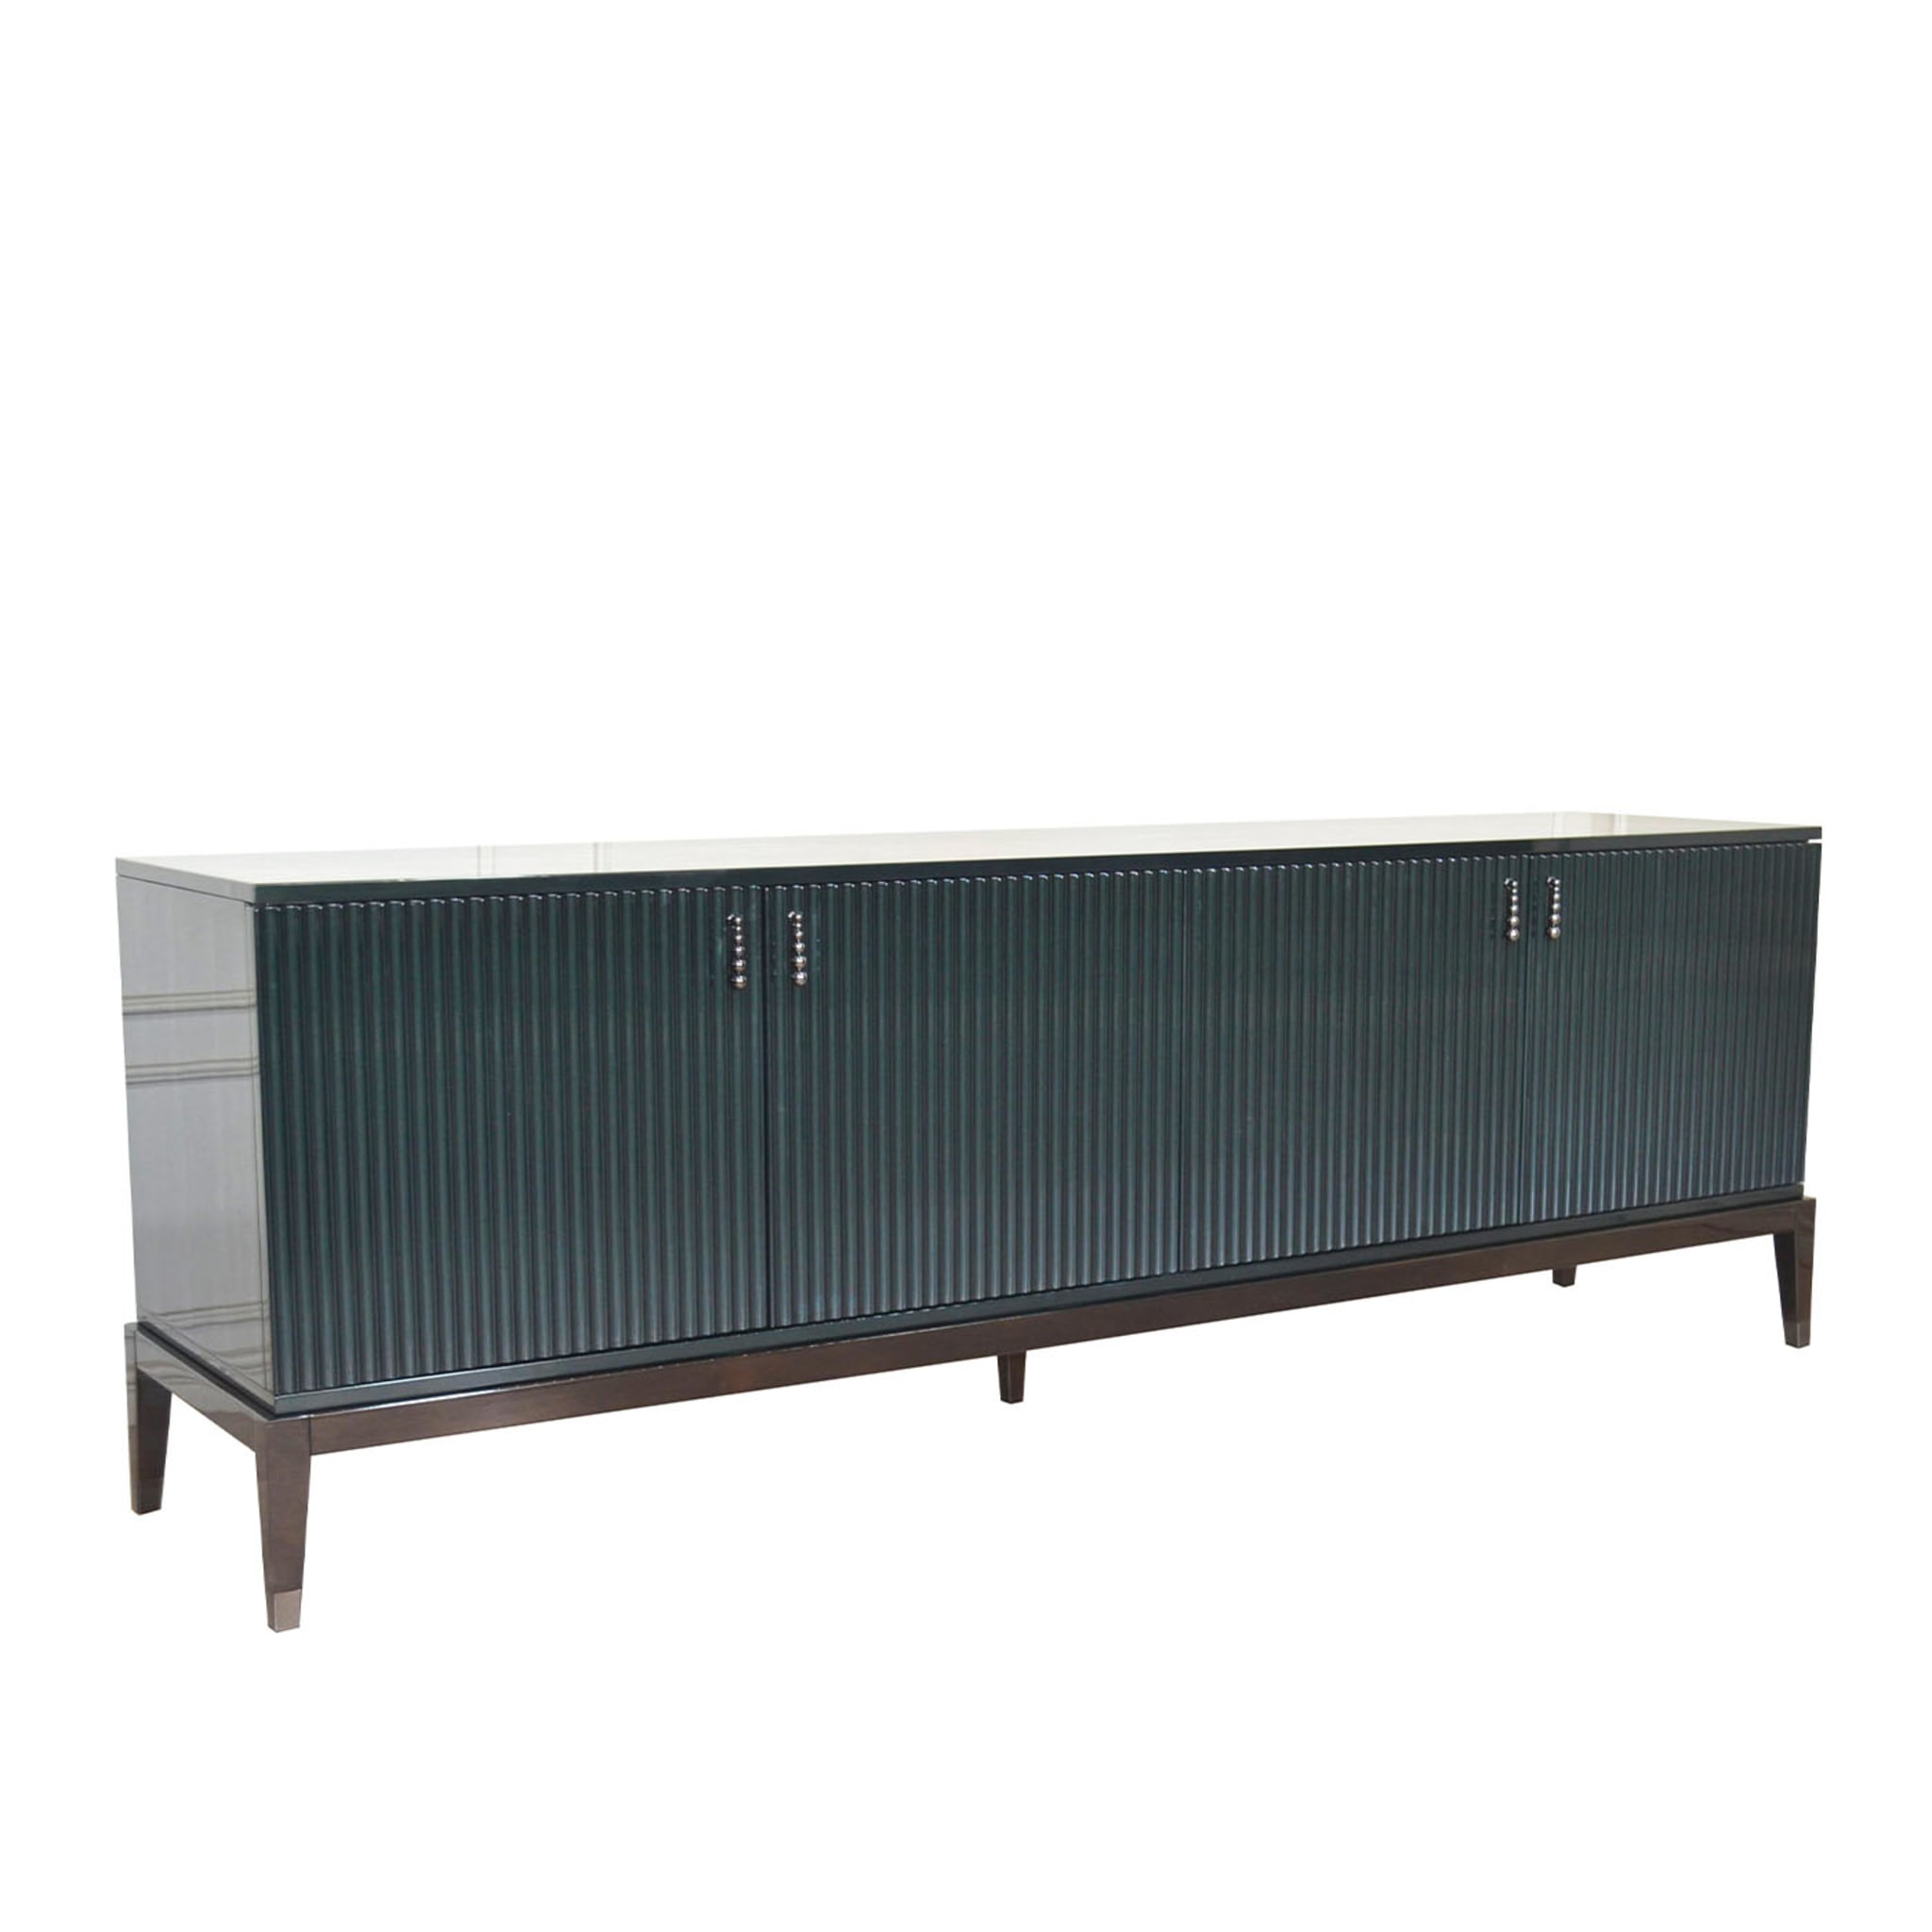 Italian Sideboard in Glossy Green Emerald Lacquered  - Alternative view 1